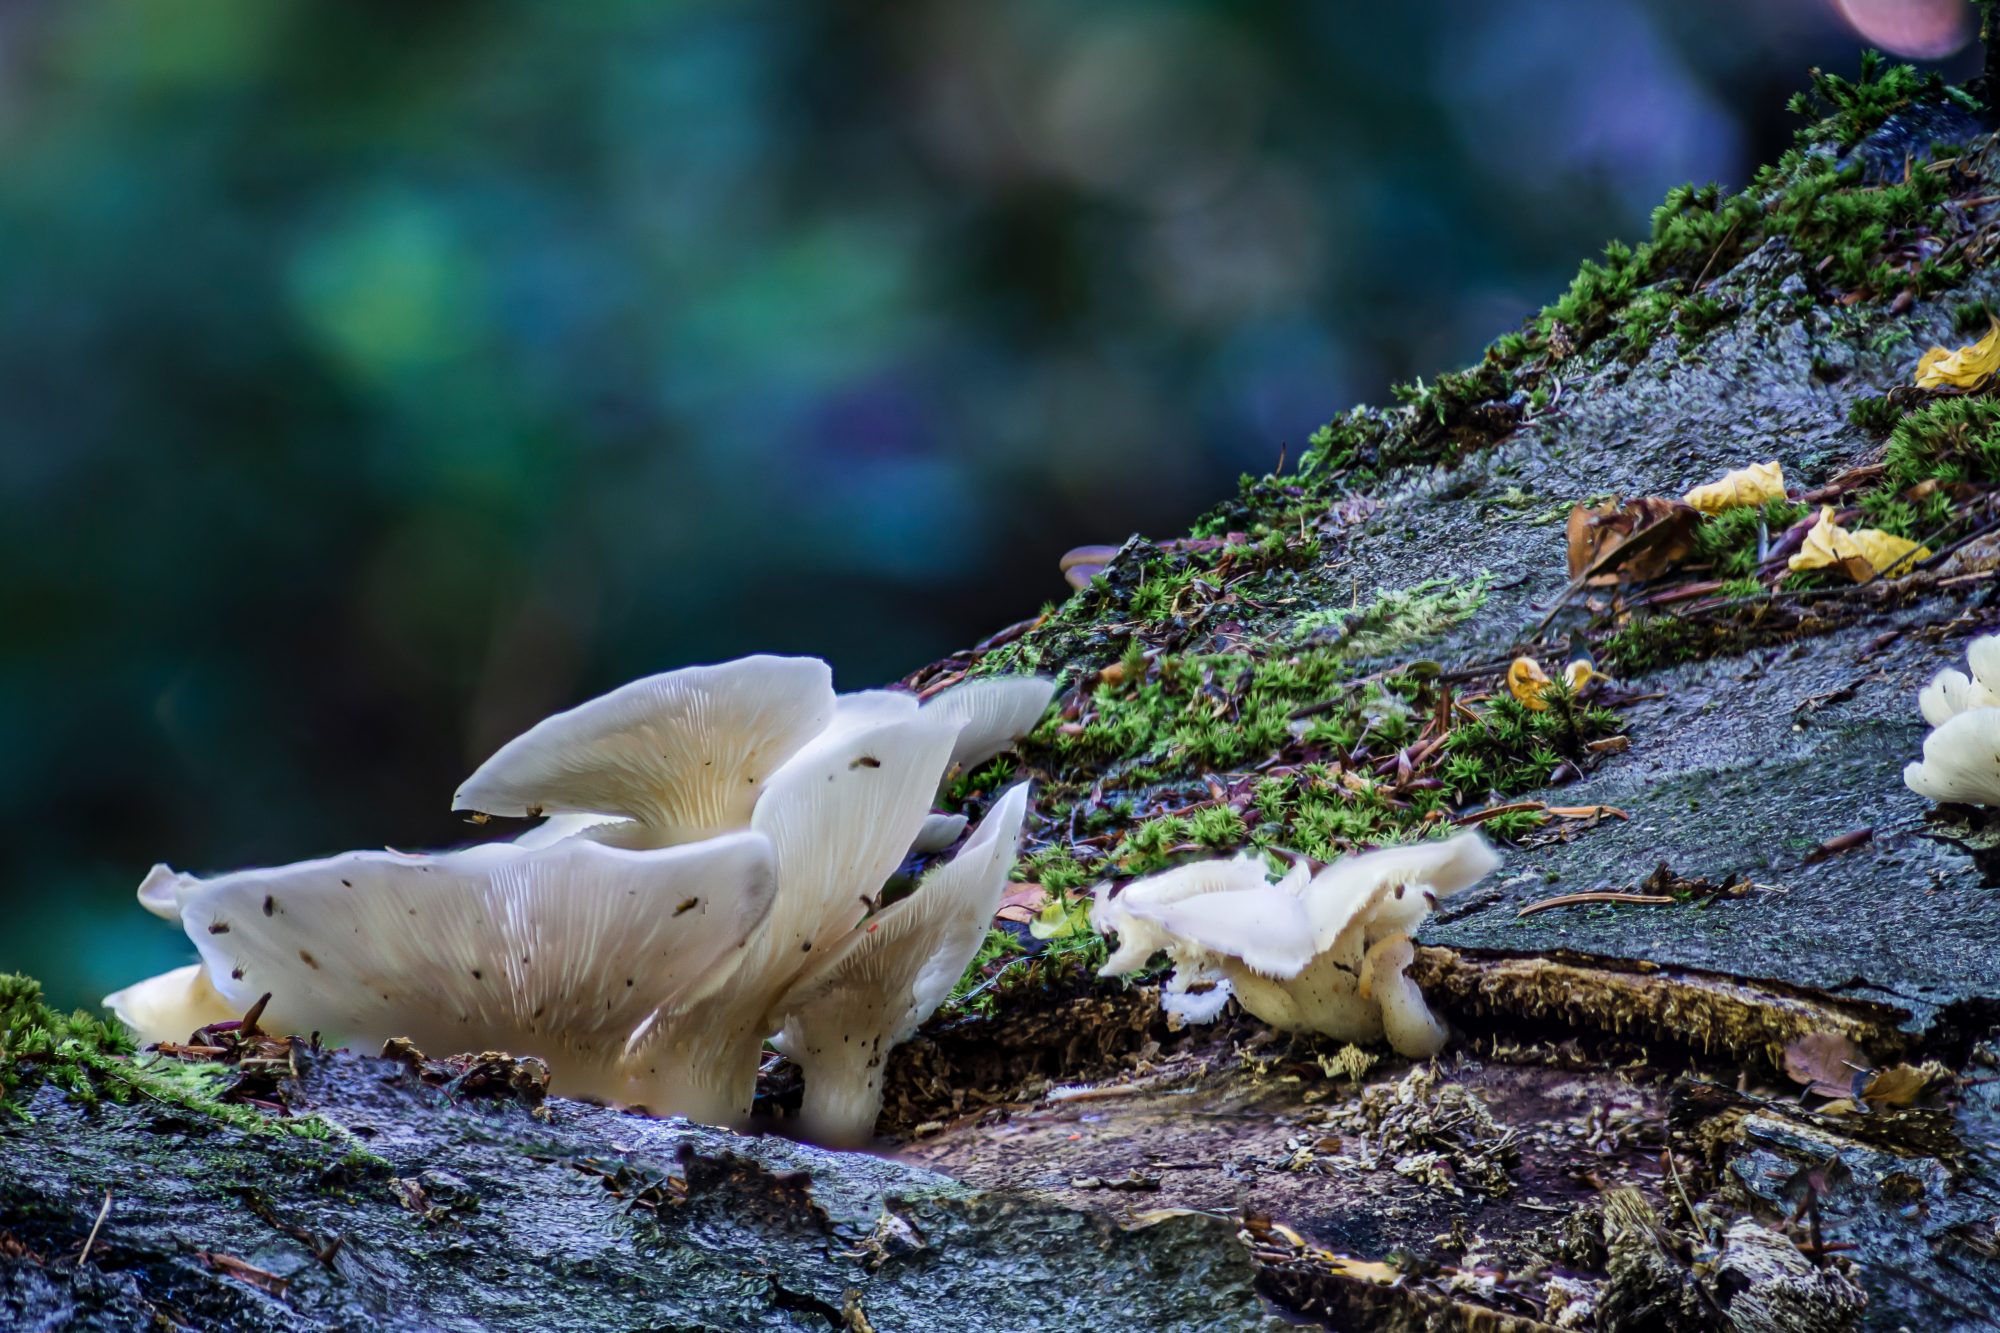 A white angel's wings mushroom on a fallen tree in the forest of Rhineland Palatinate, Germany